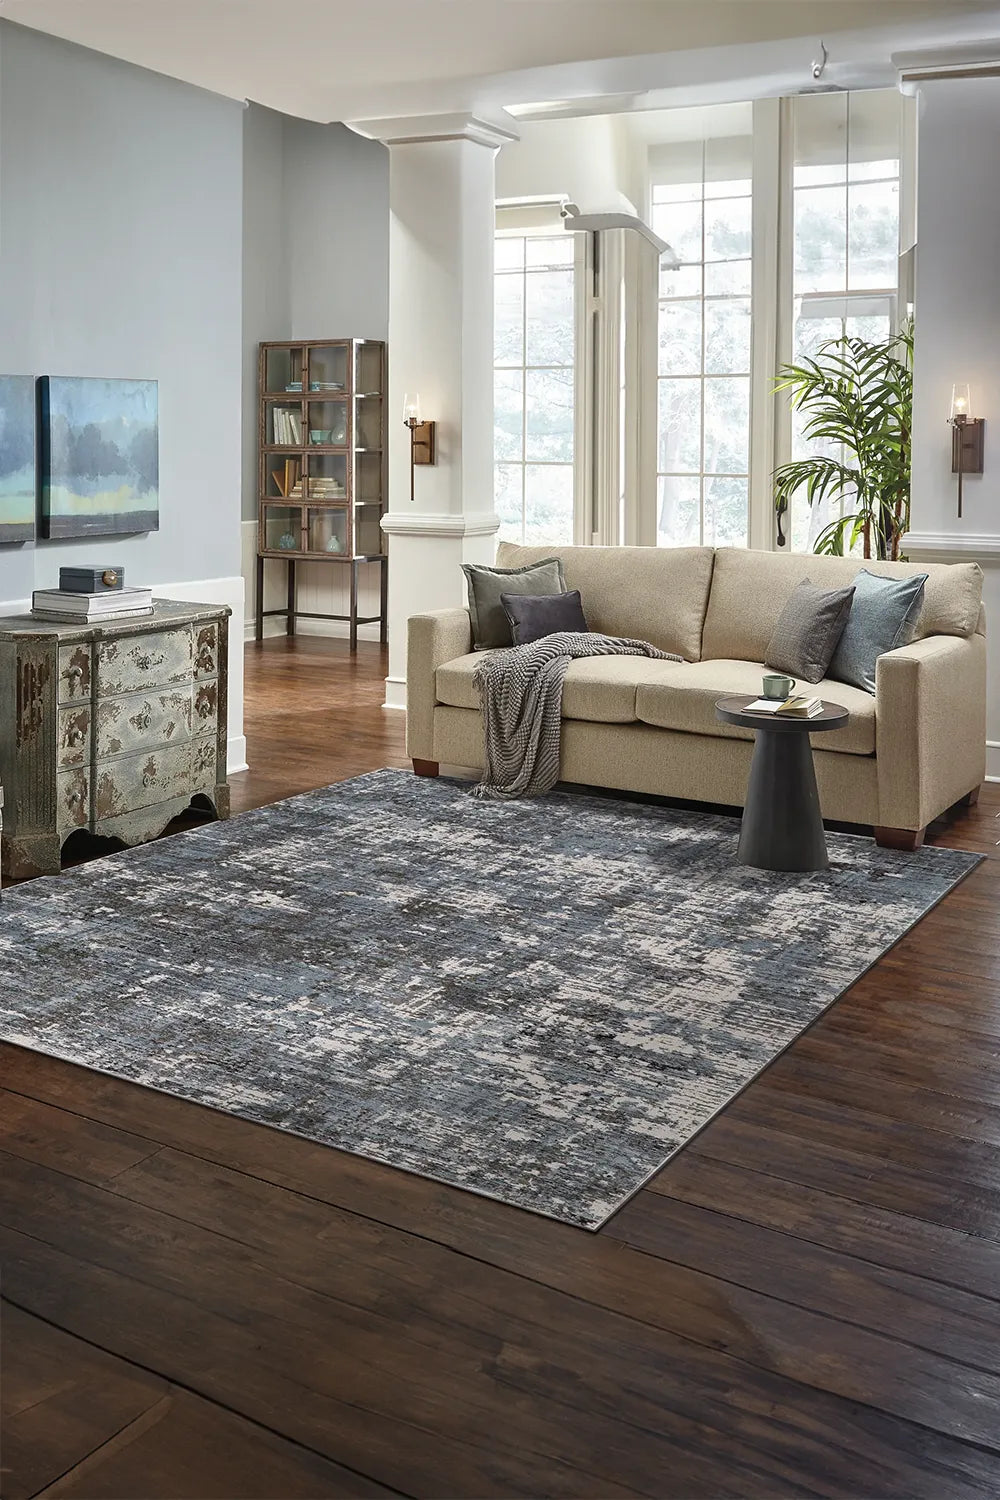 Brilliant Abstract Rug - 107 Blue